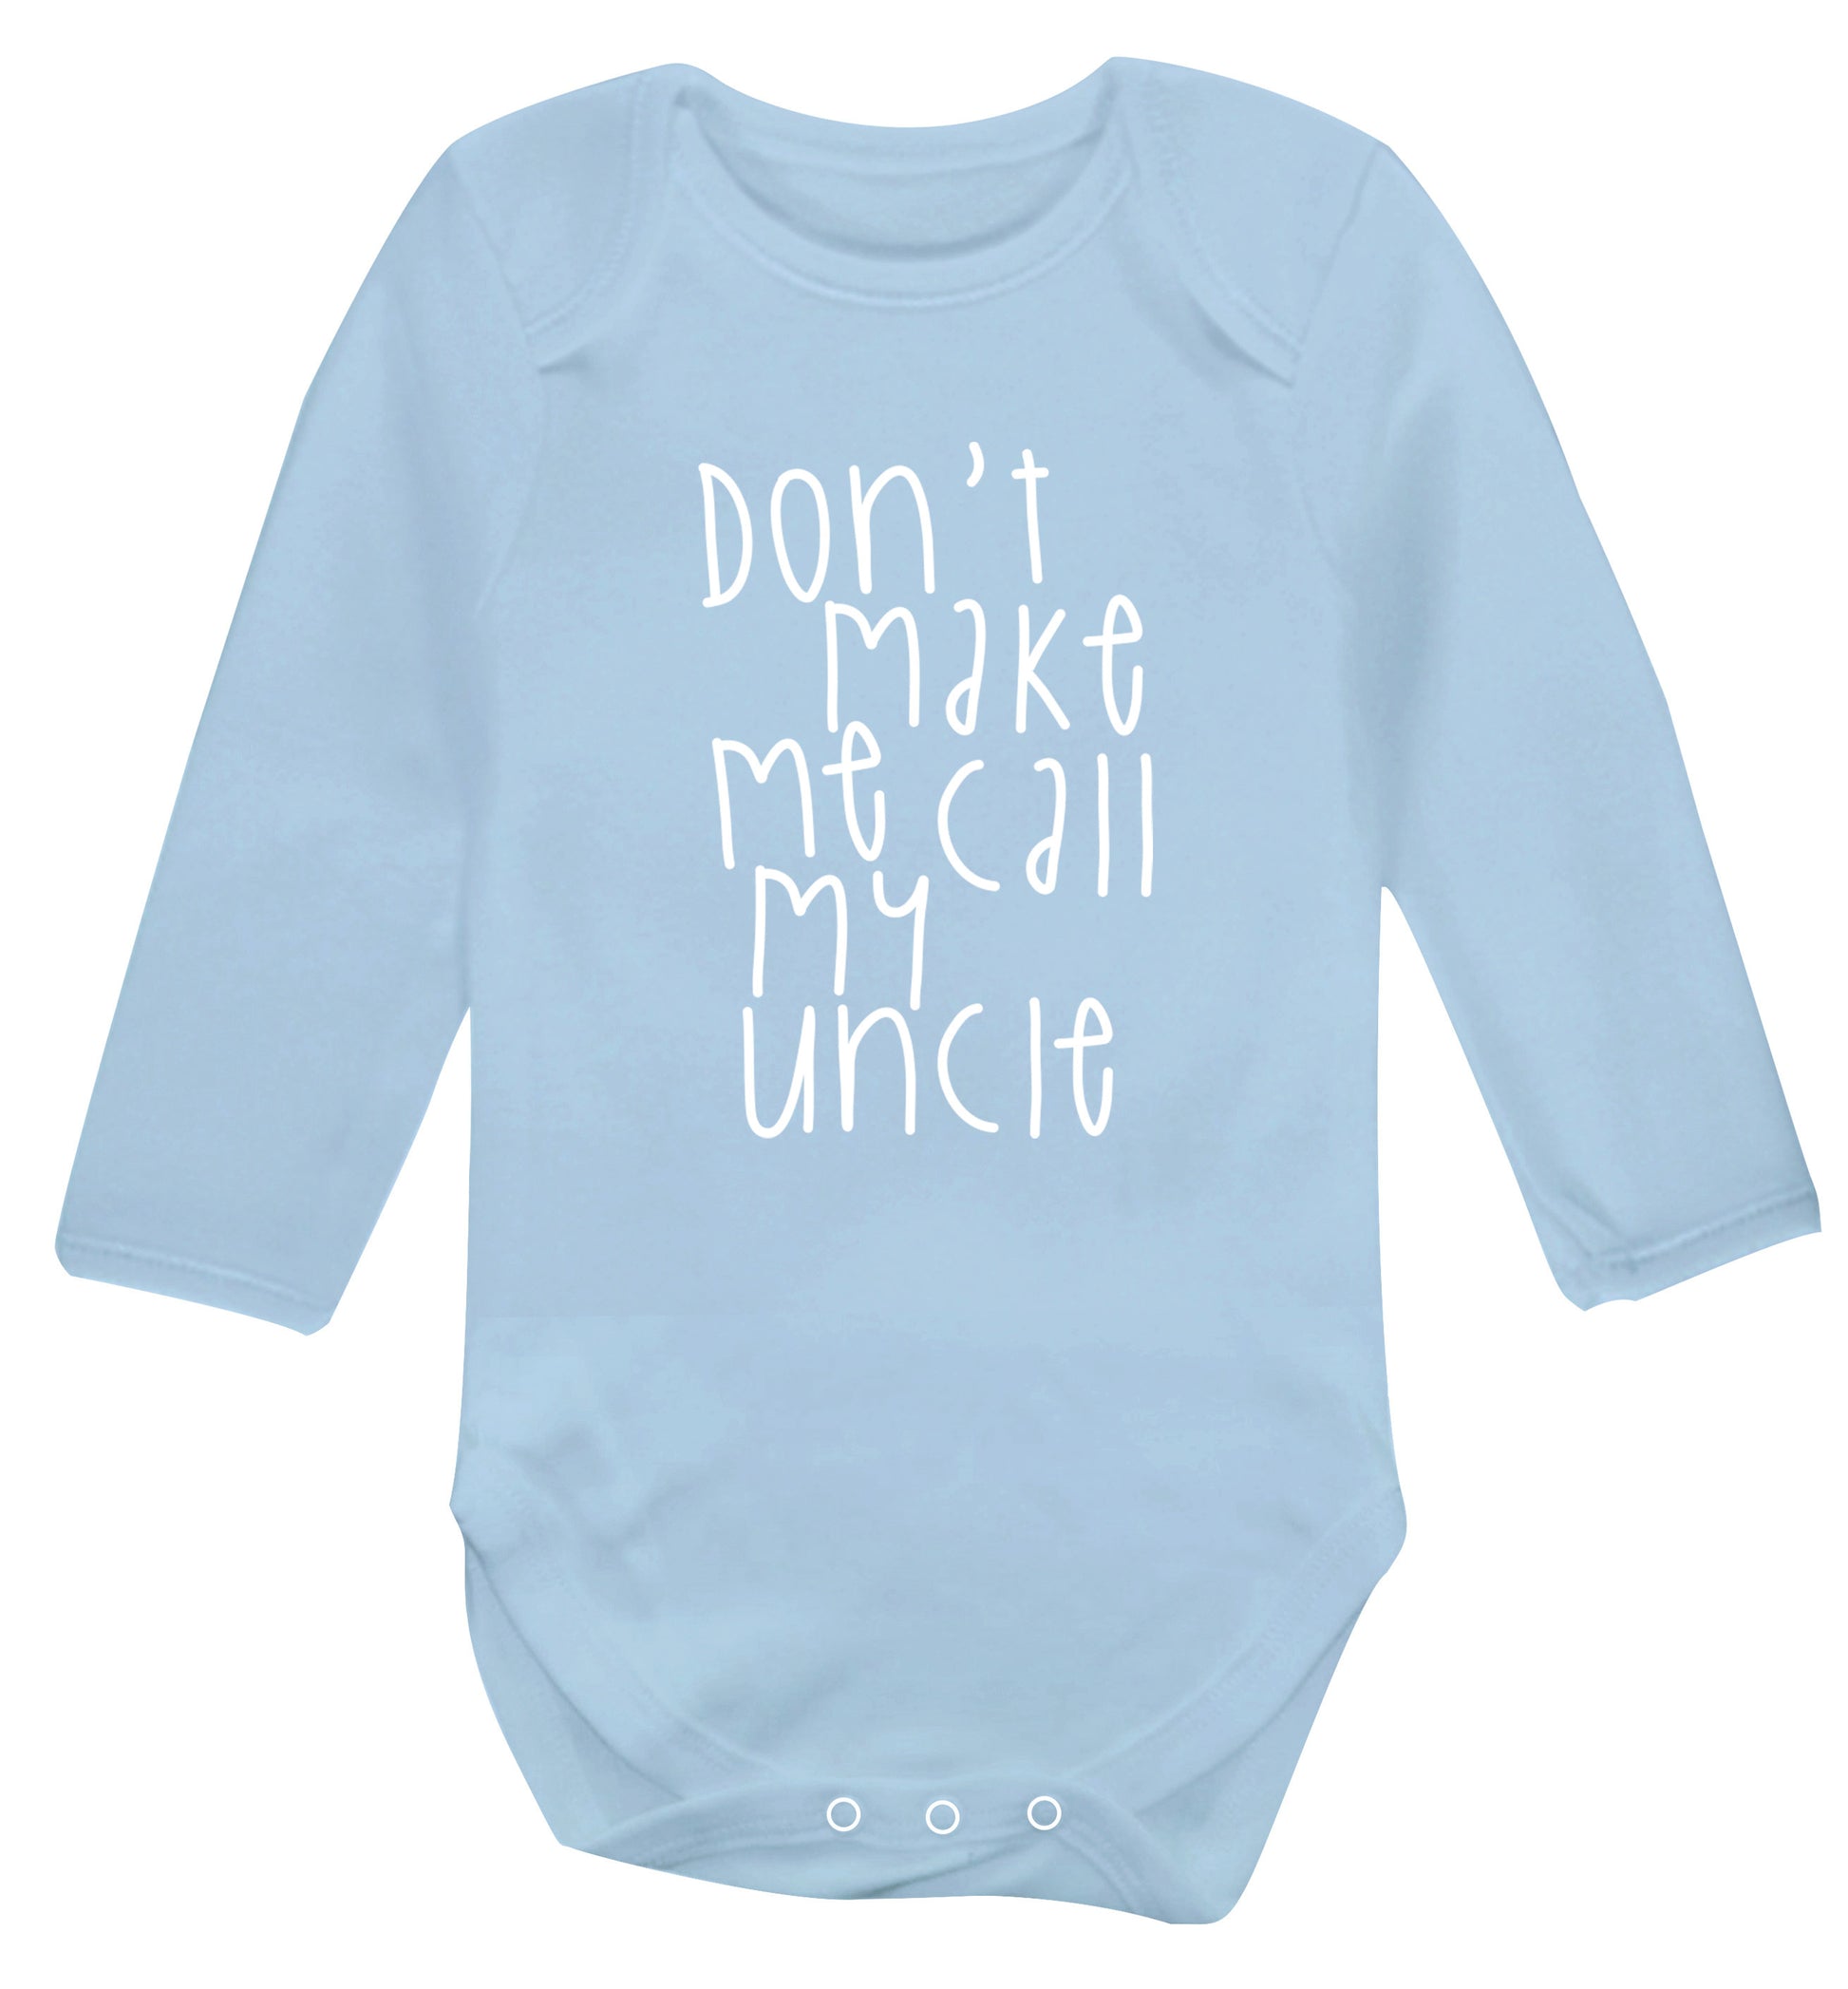 Don't make me call my uncle Baby Vest long sleeved pale blue 6-12 months